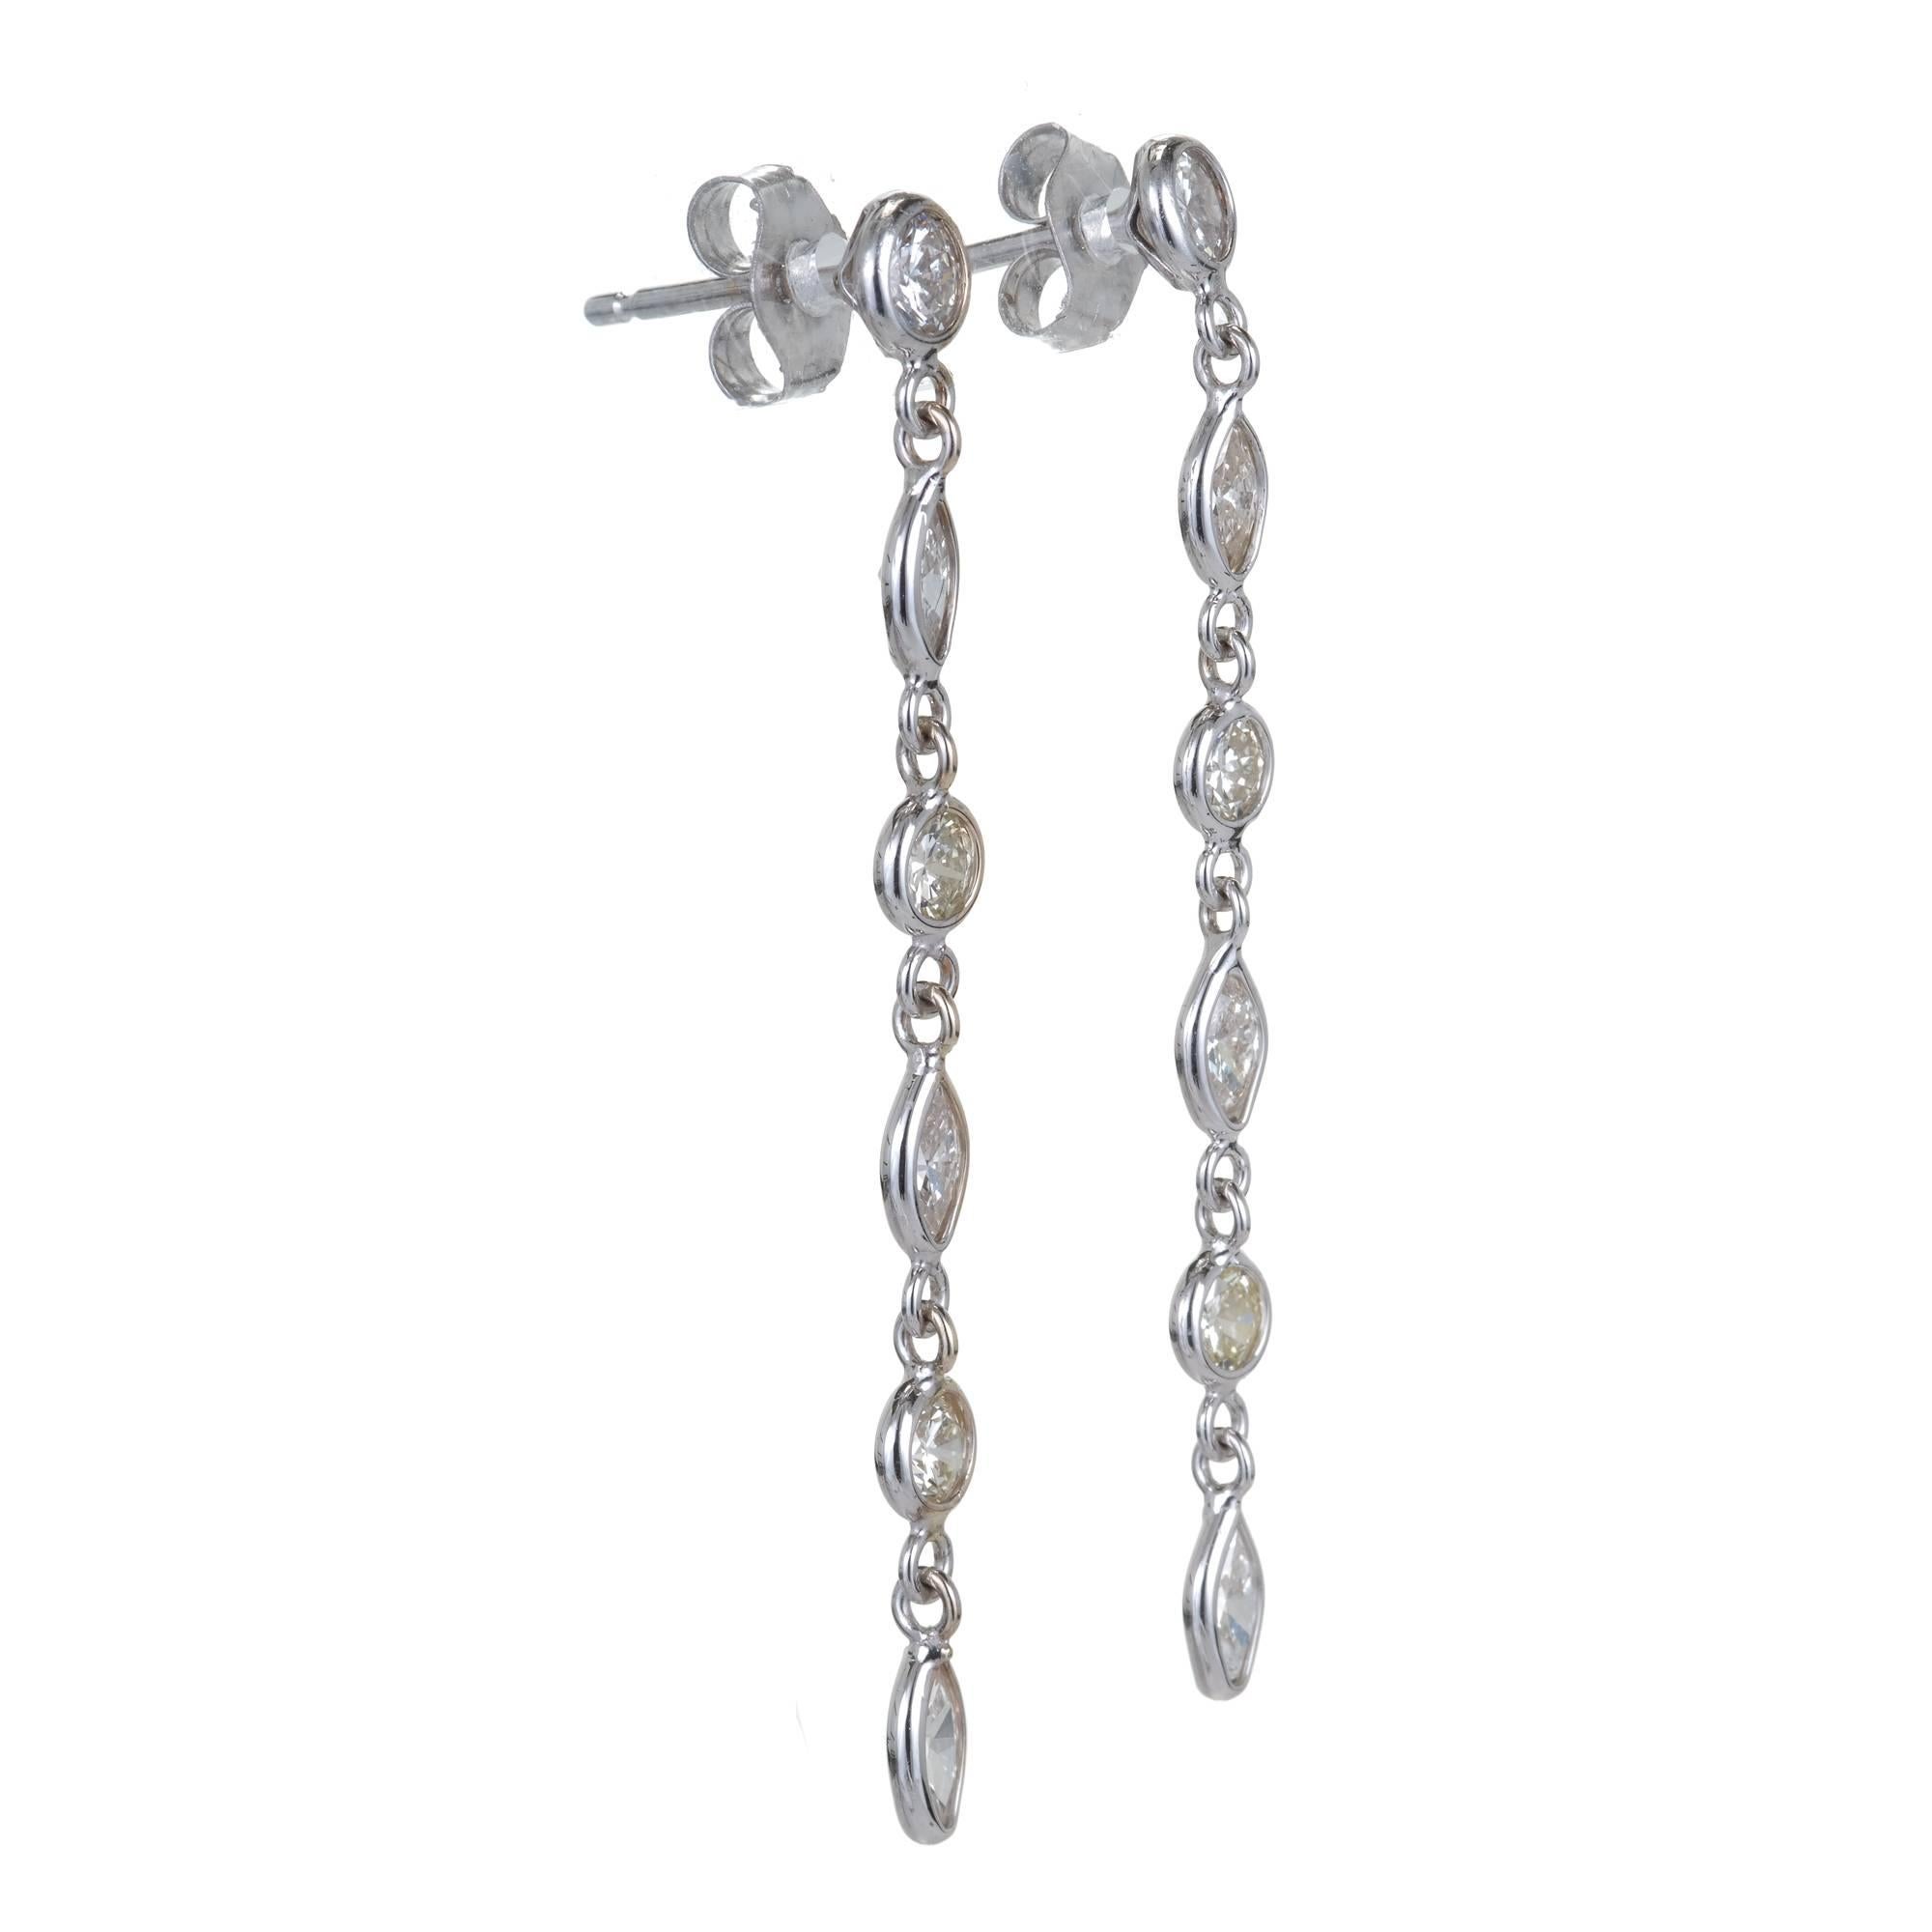 Handmade 14k white gold sparkly diamond dangle drop earrings. These earrings are from the Peter Suchy Workshop. Solid gold with cable chain 1.4mm and hand crafted diamond bezel rims designed to show off the diamonds sparkle.

6 round and 6 Marquise